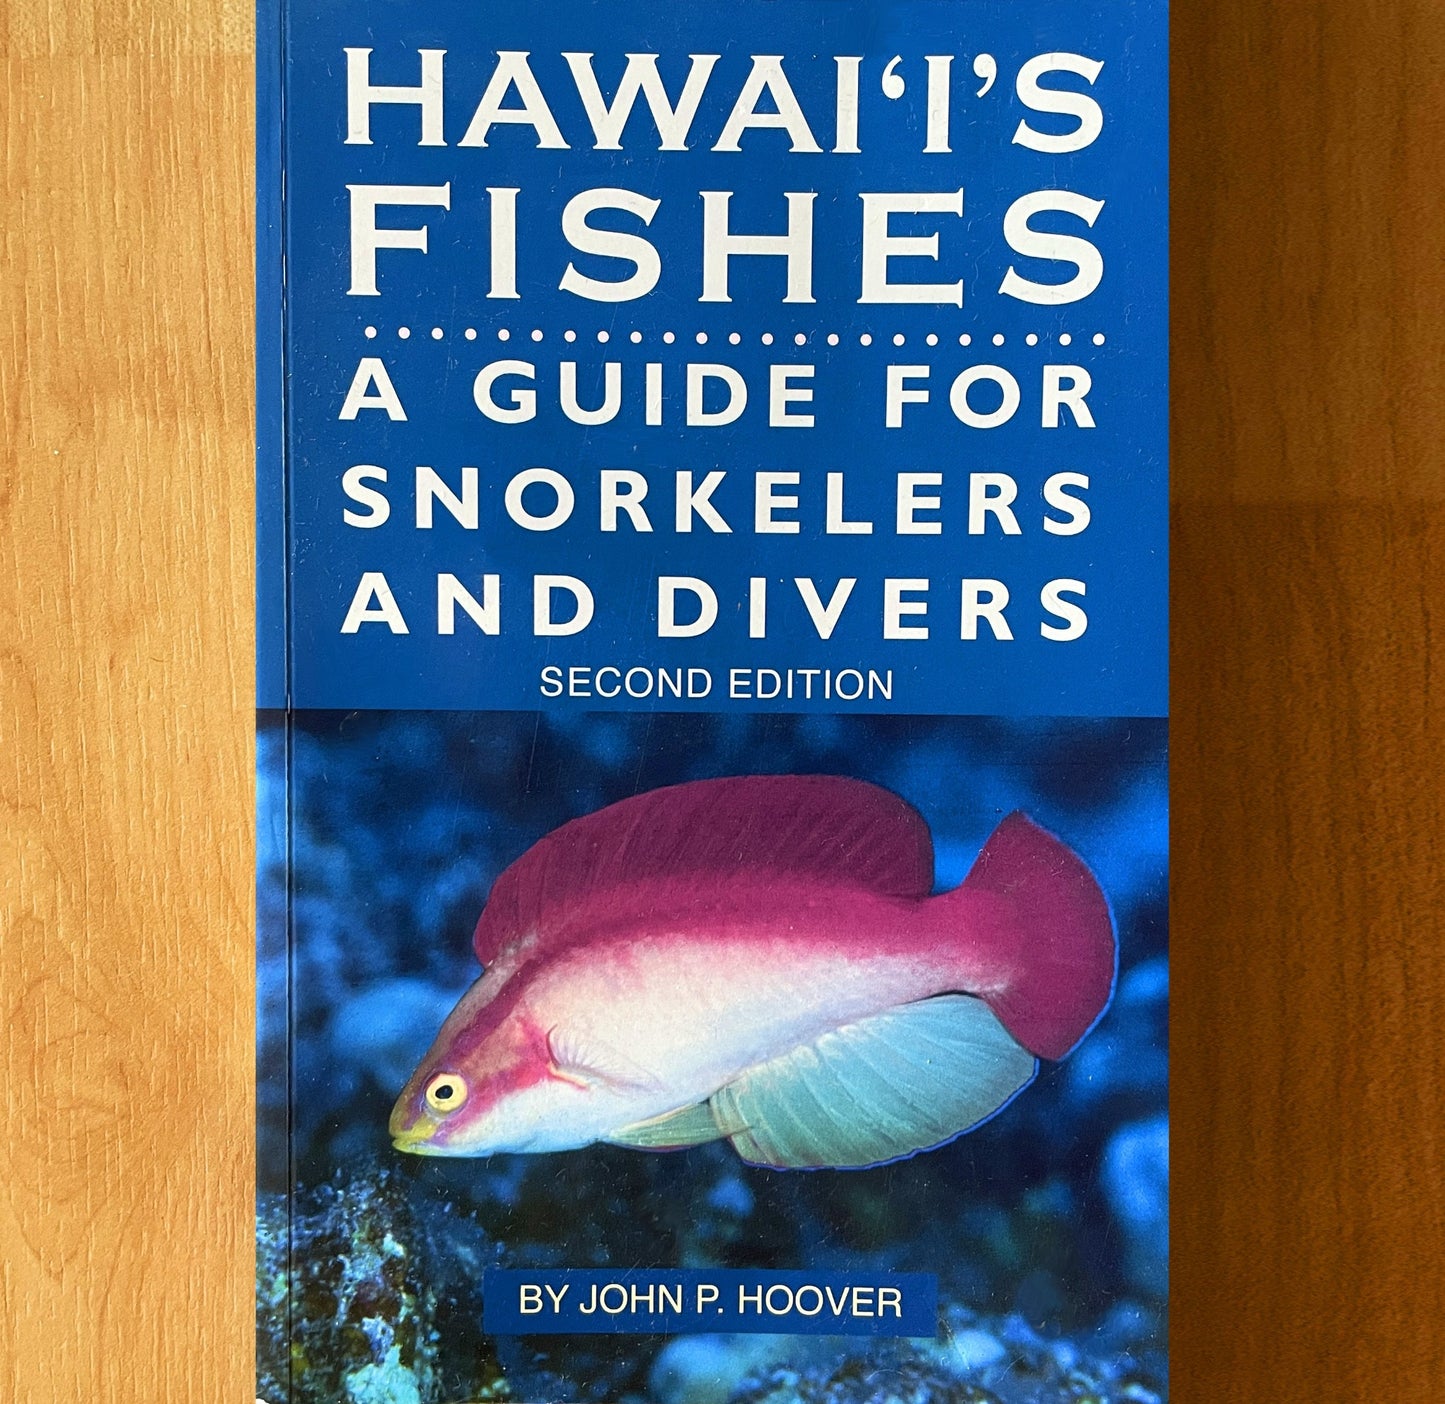 Hawaii's Fishes Guide